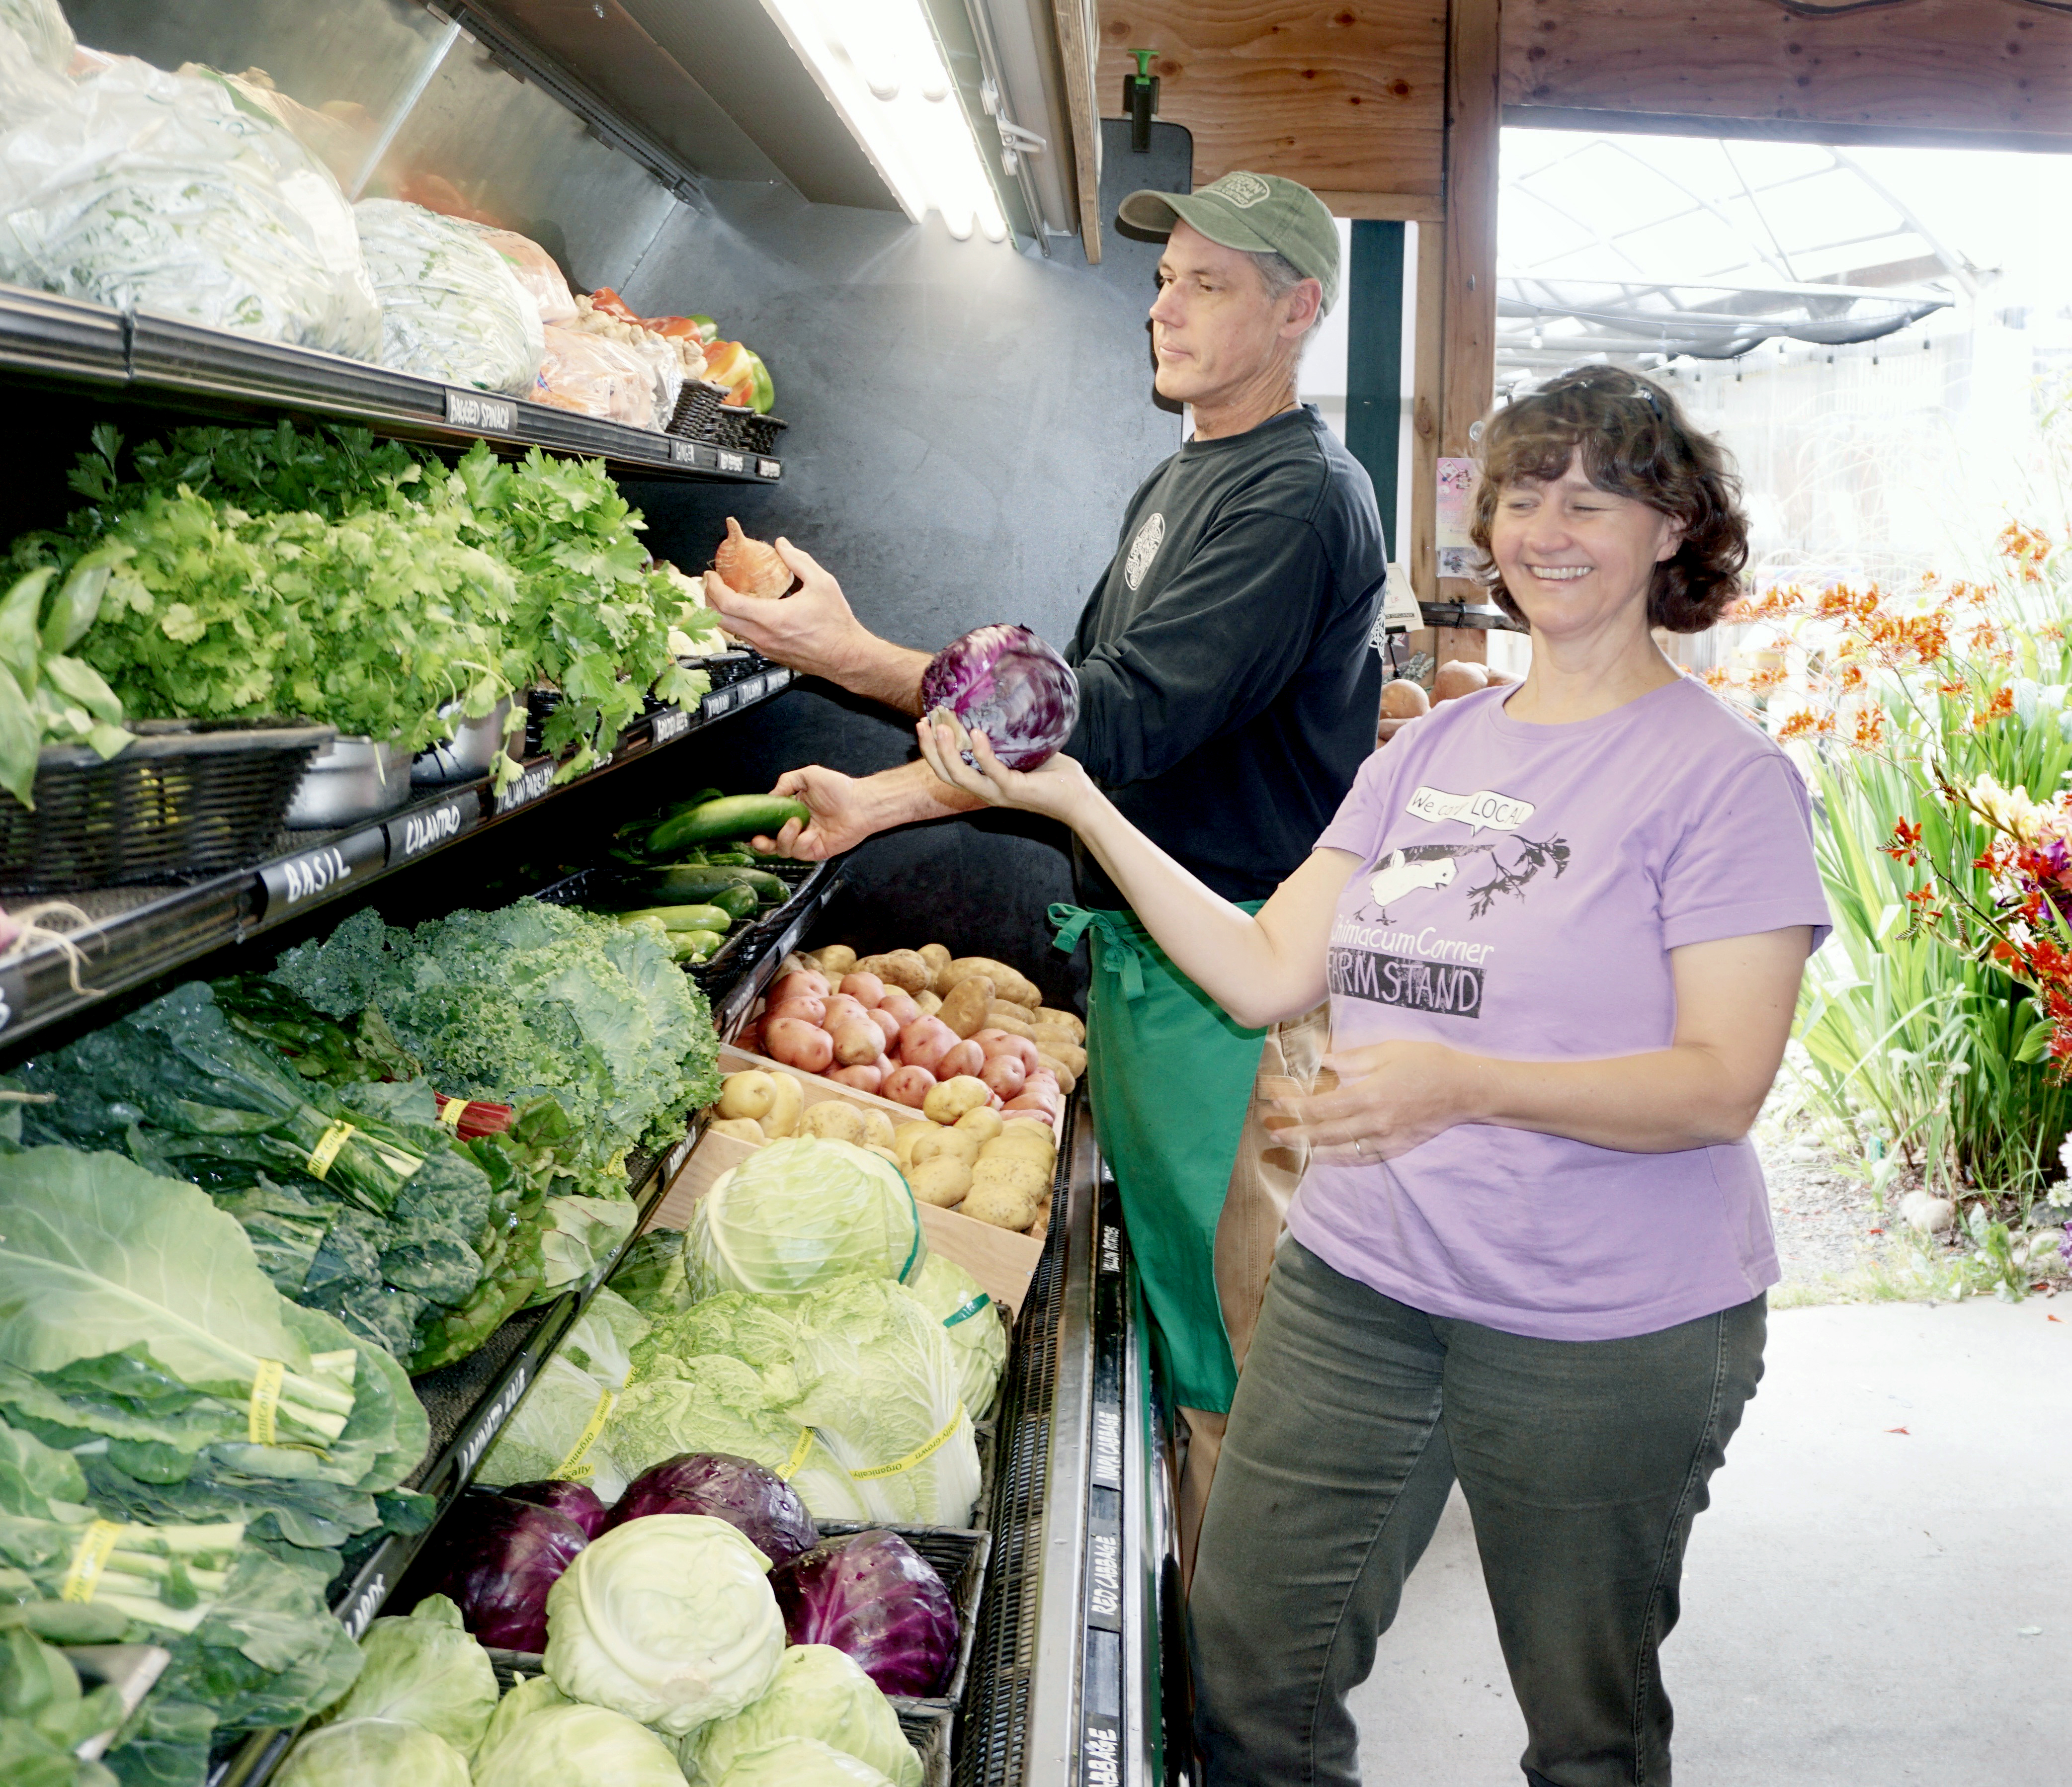 Chimacum Corner Farmstand general manager Rob Story and grocery manager Kristin Berg arrange some of the business’ fresh produce. — Charlie Bermant/Peninsula Daily News ()